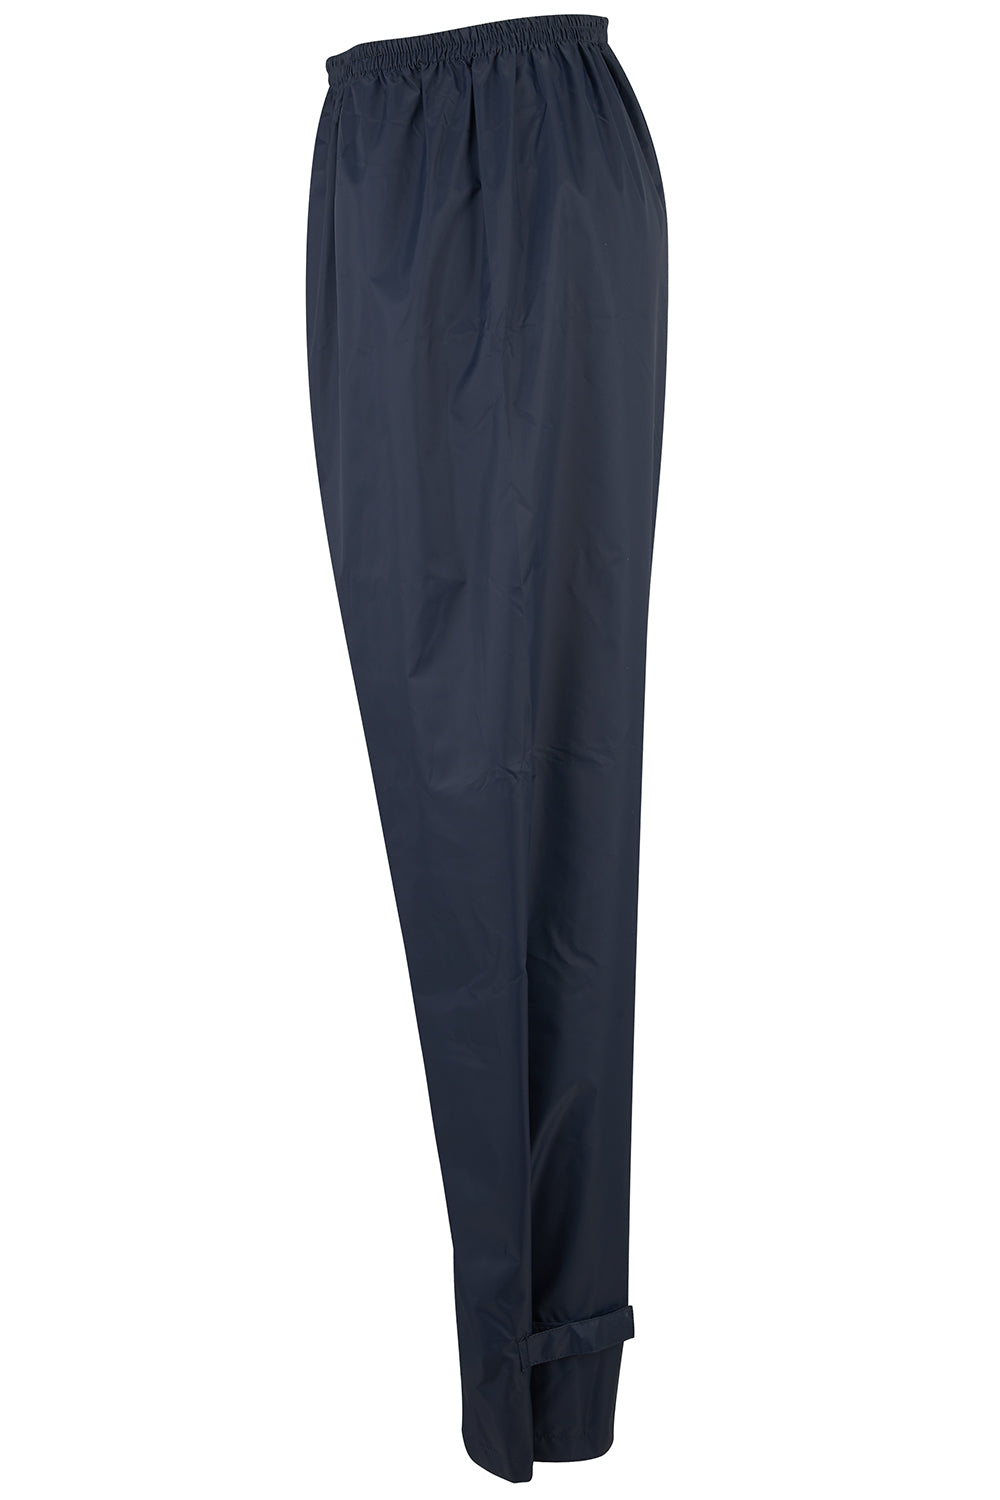 Overtrousers Packable Waterproof Overtrousers - Navy